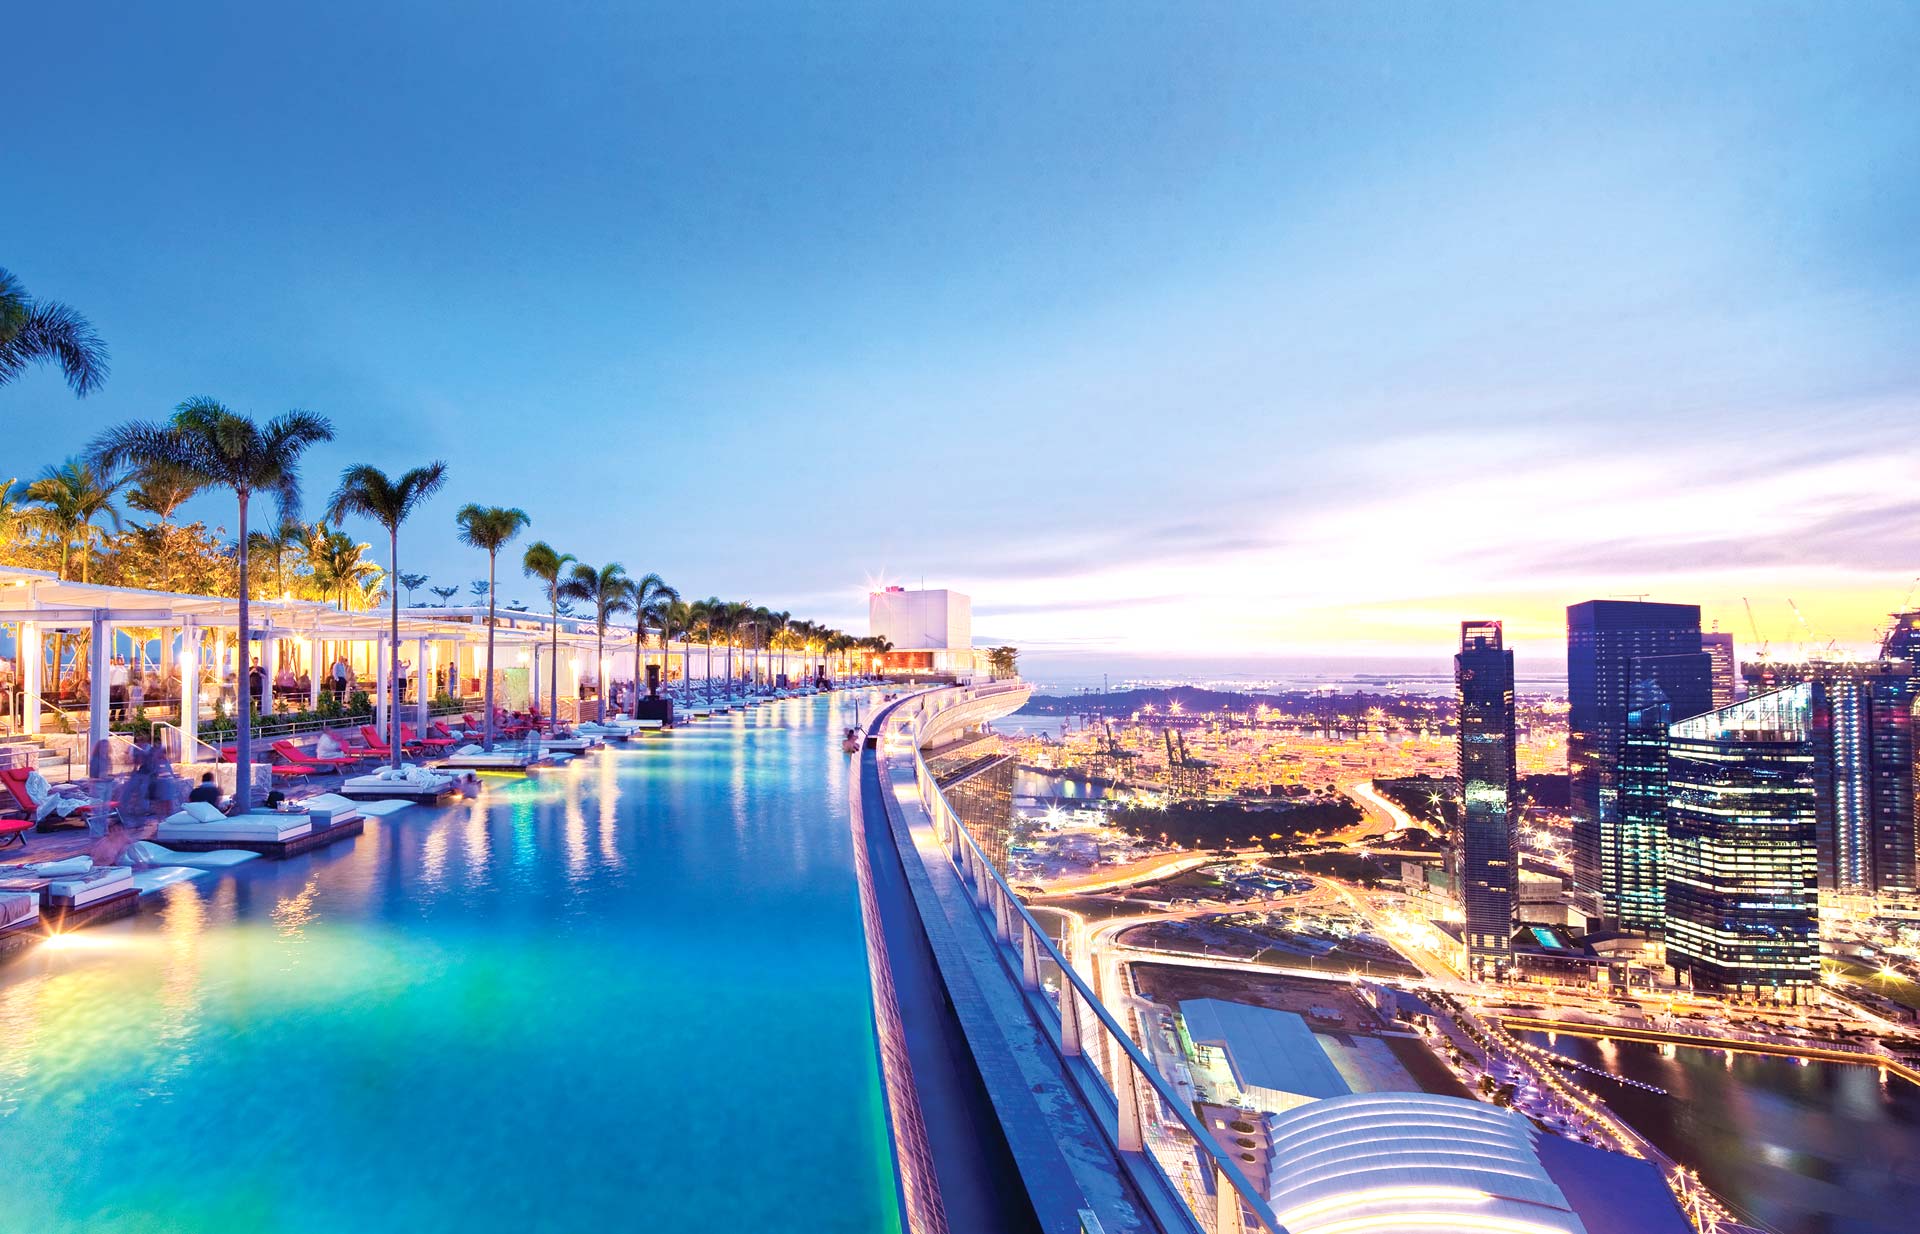 Infinity Pool | Things To See & Do in Singapore | Marina Bay Sands